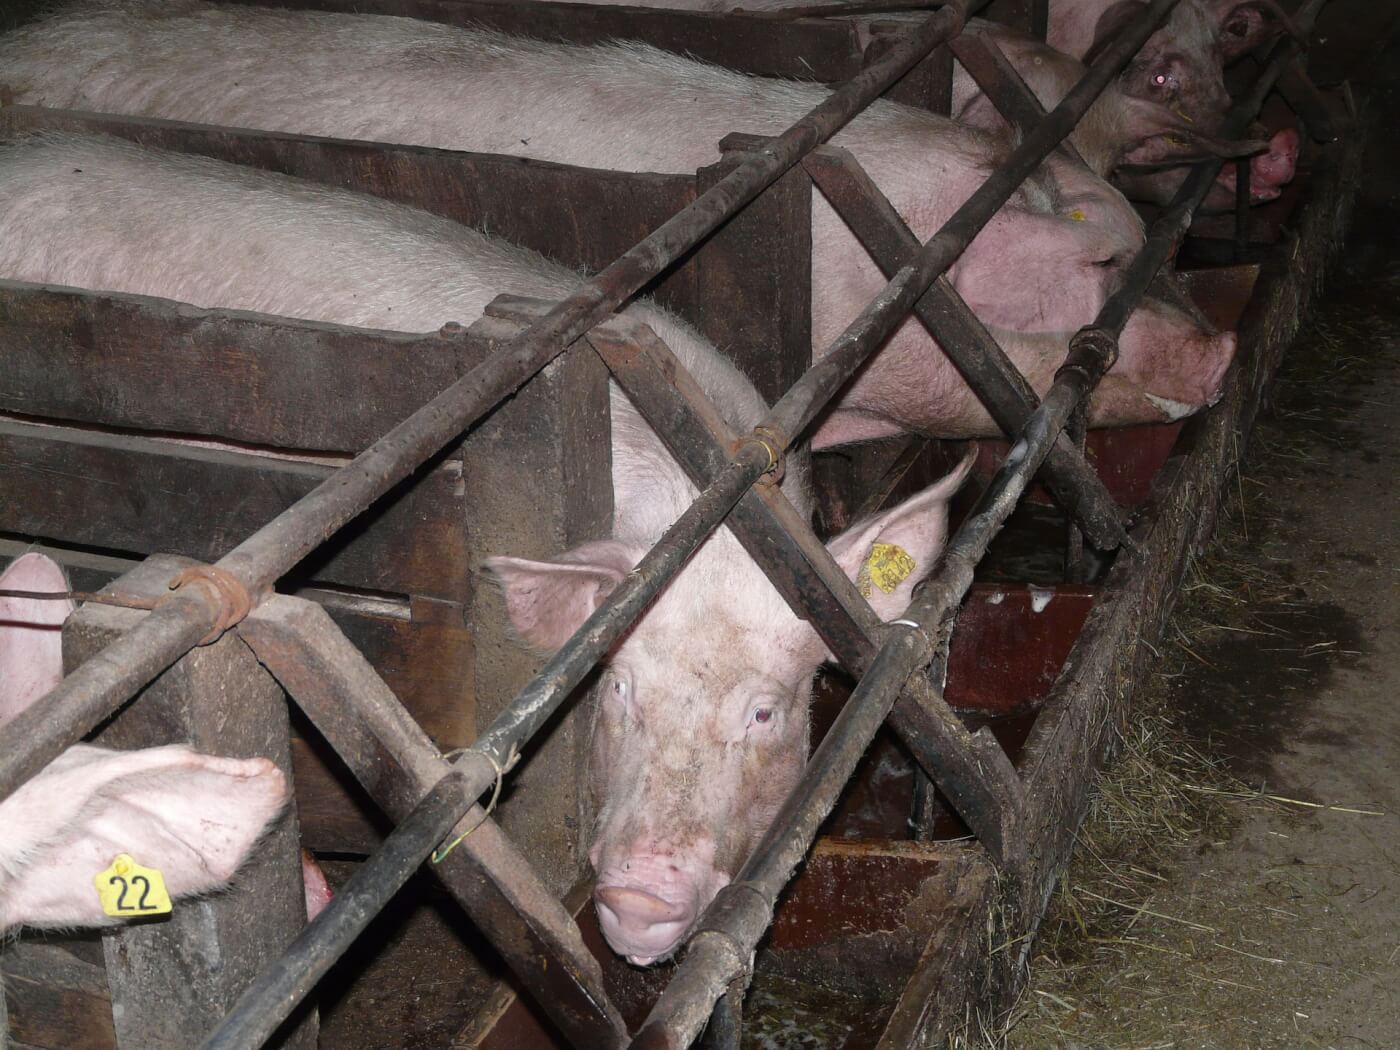 Madhya Pradesh Prohibits Cruel Crates Used to Confine Mother Pigs Following PETA India Appeal